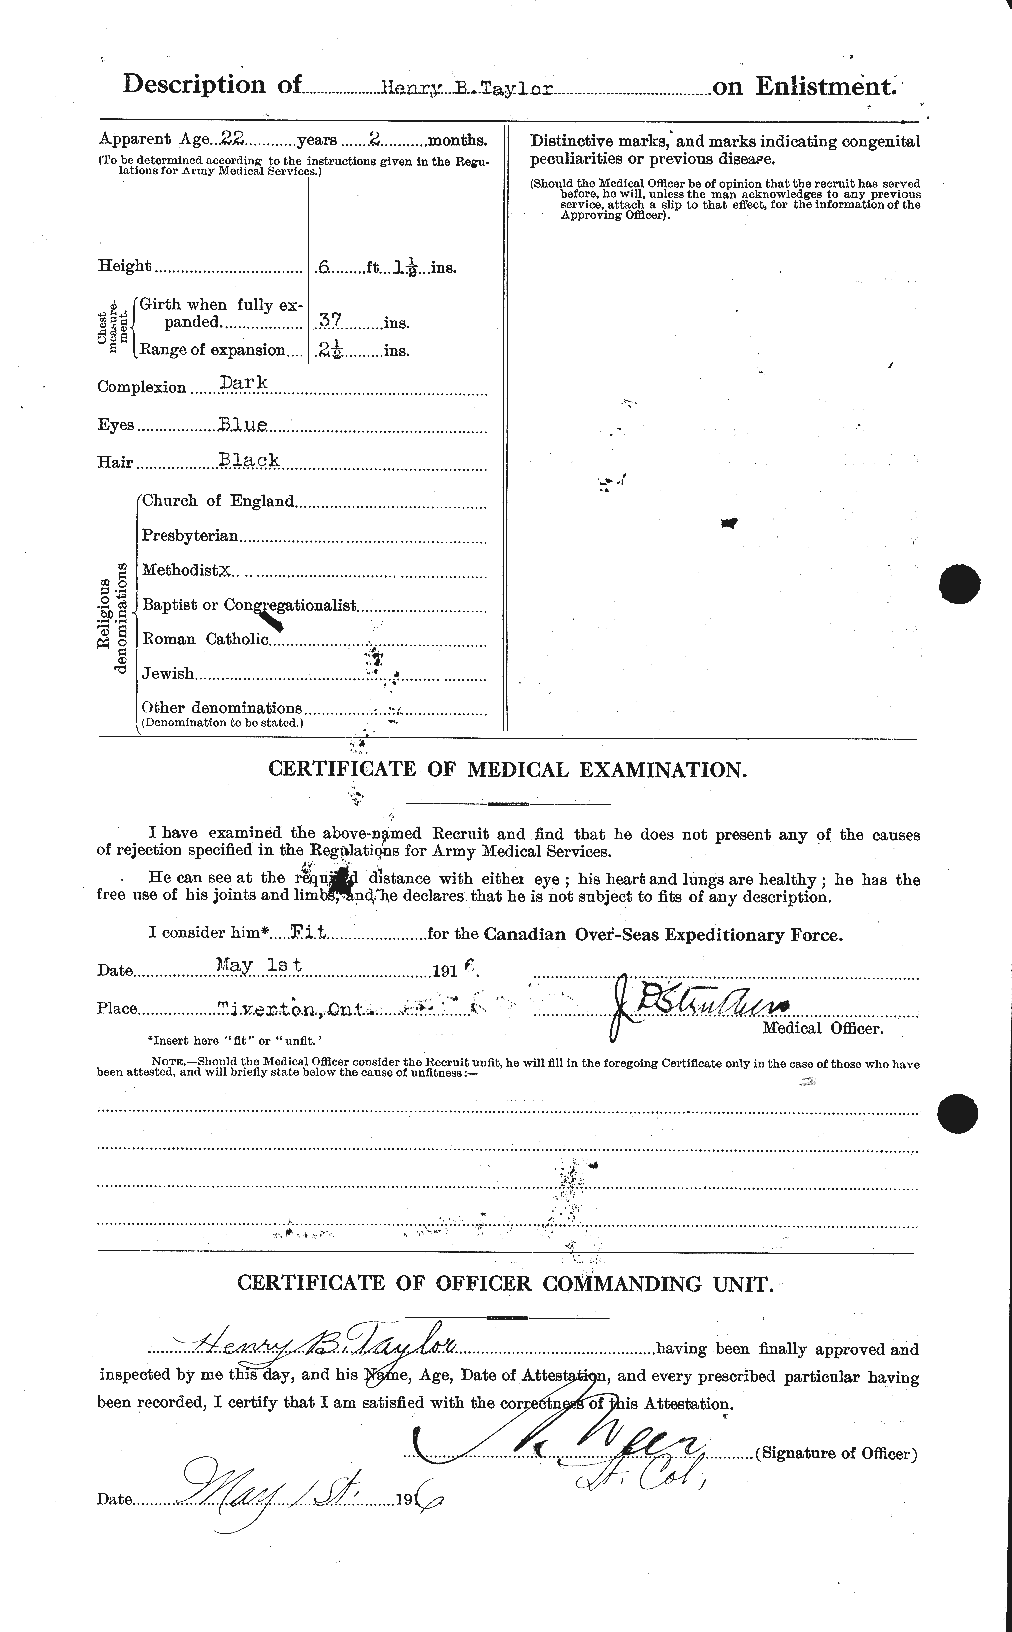 Personnel Records of the First World War - CEF 626529b